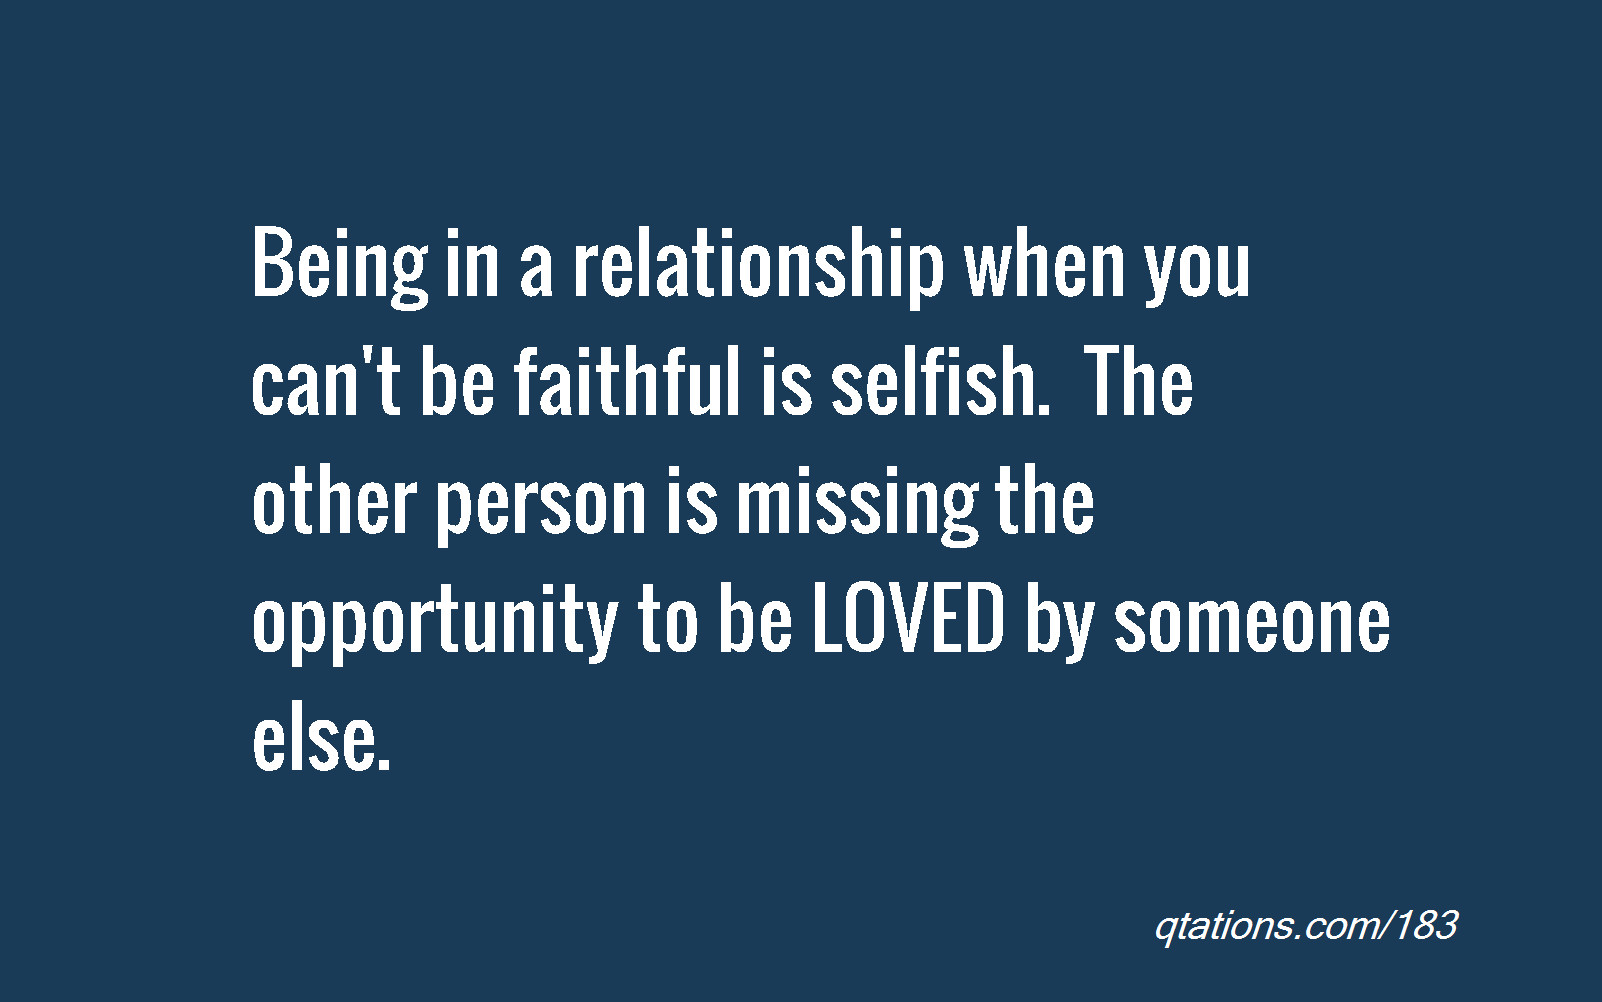 Quotes About Being Loyal In A Relationship
 Quotes About Being Loyal In A Relationship QuotesGram